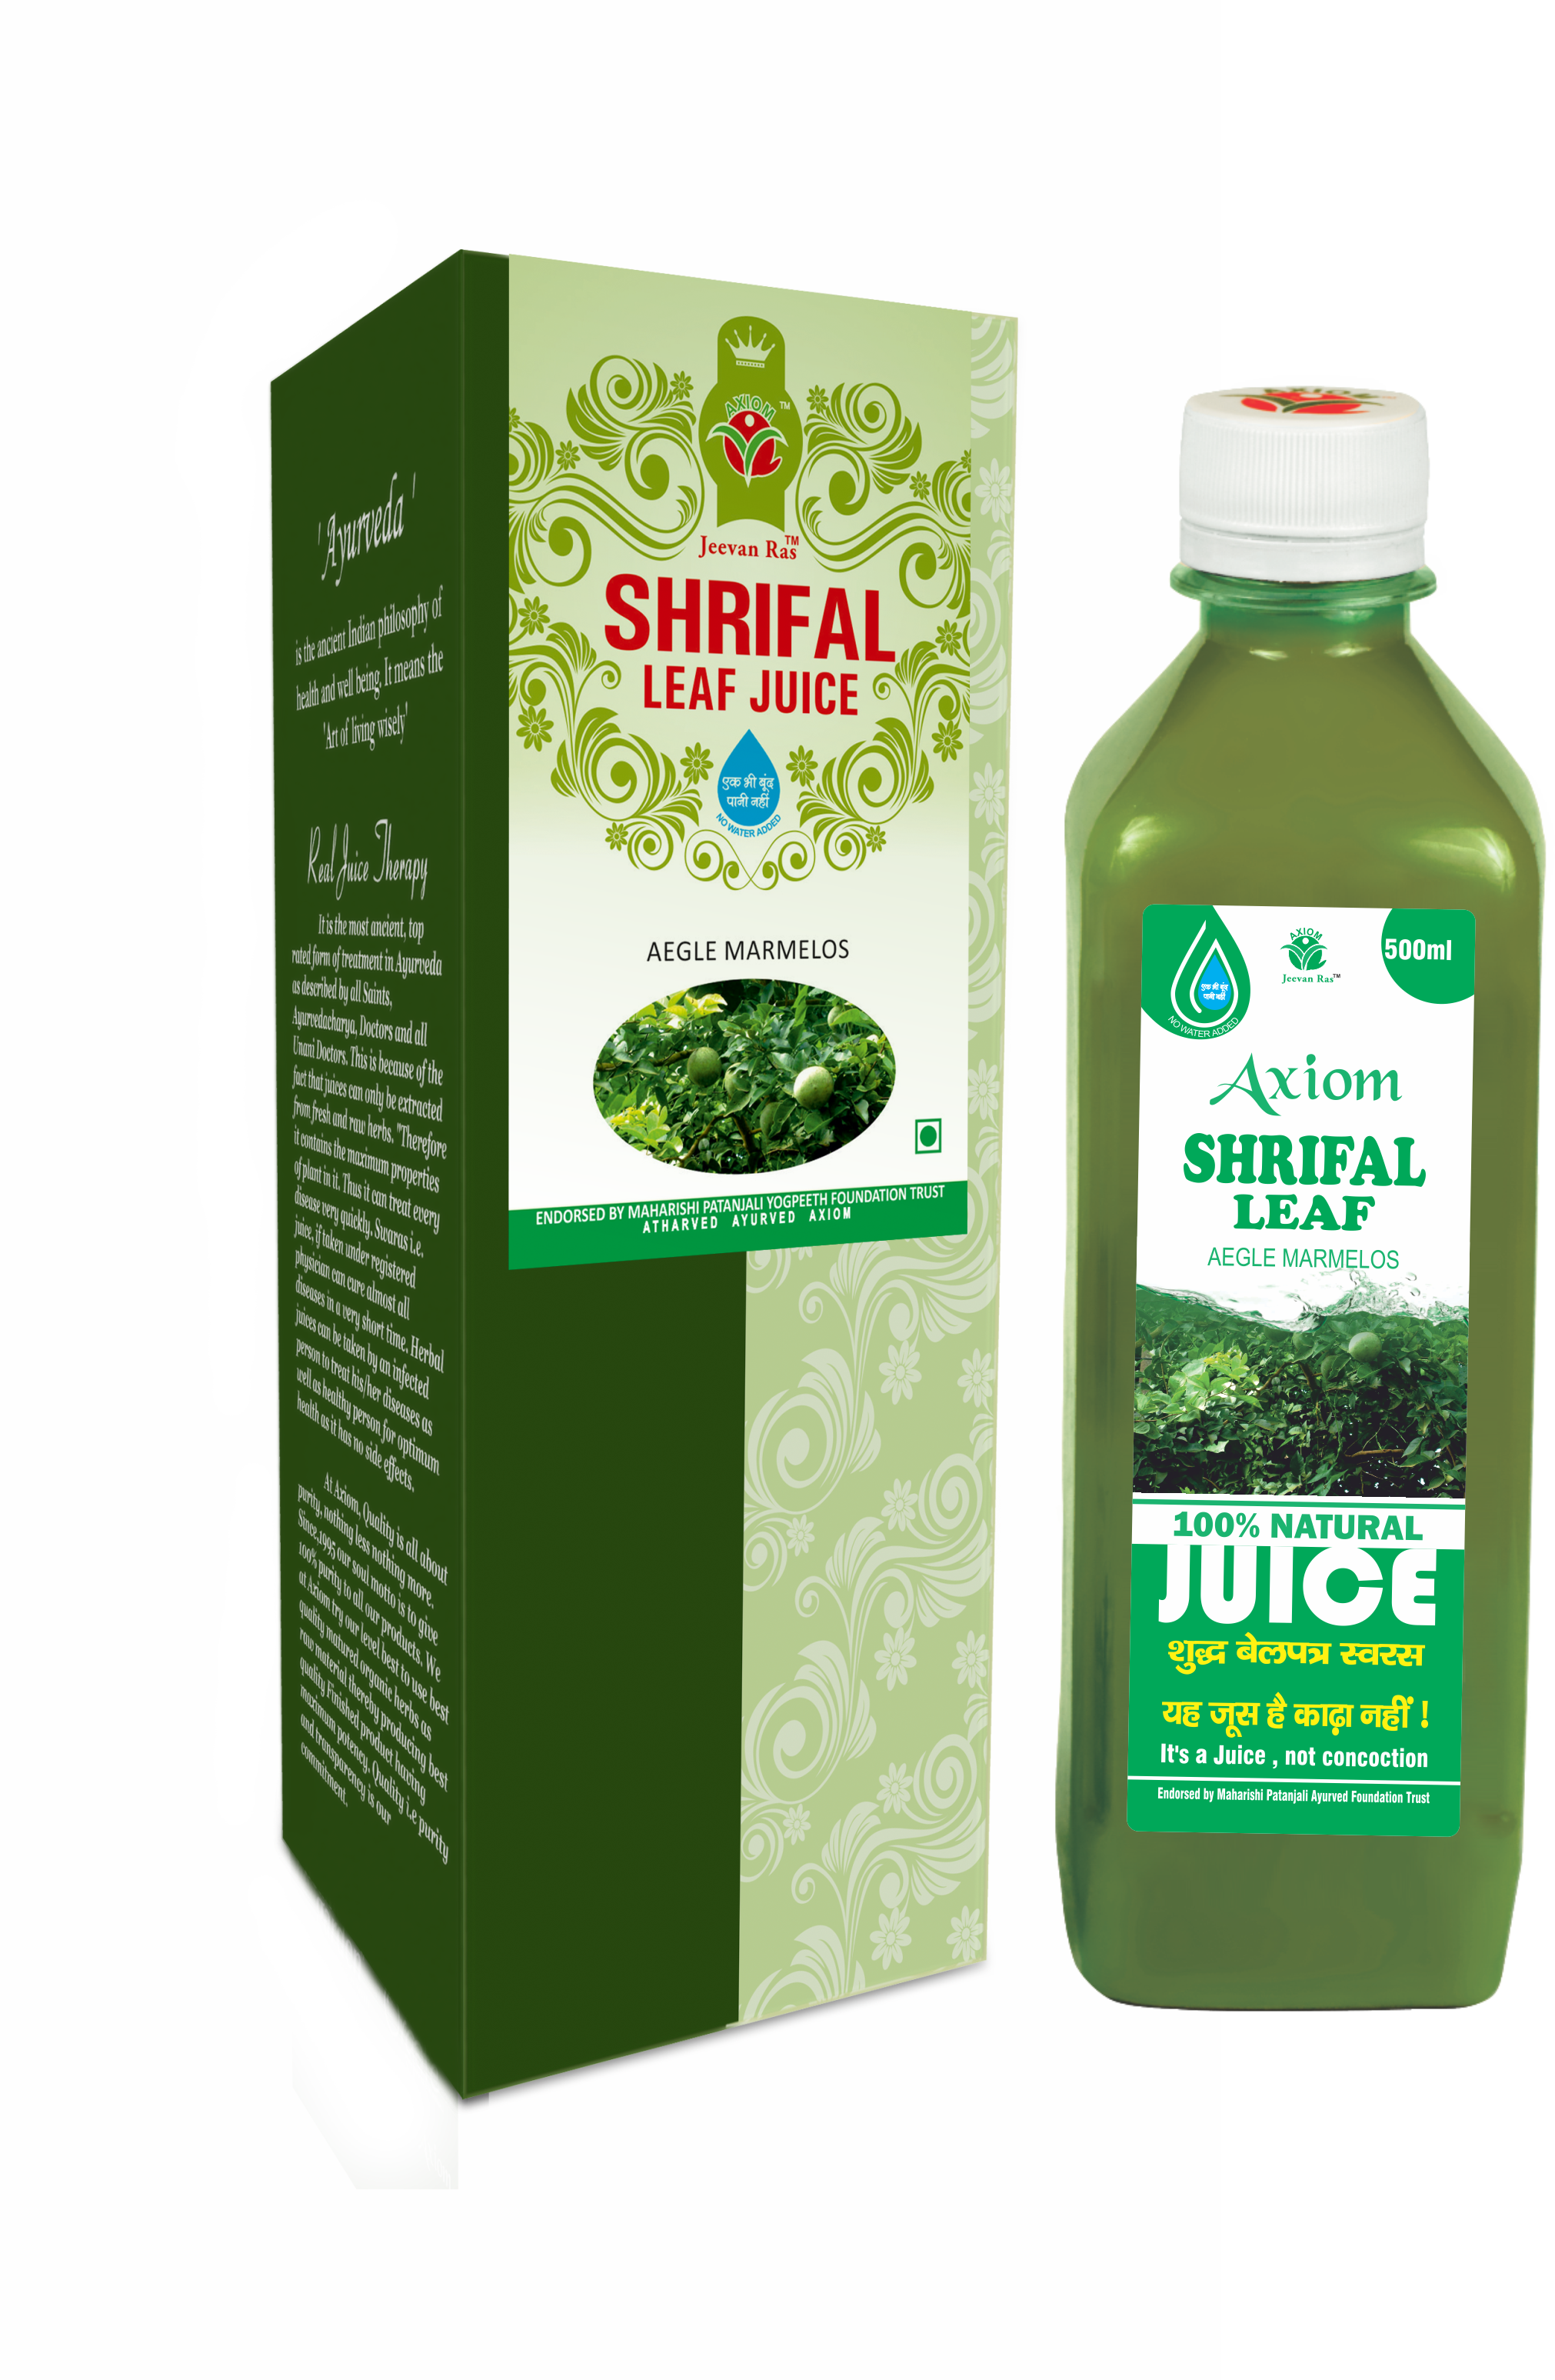 Buy Axiom Shrifal Juice at Best Price Online